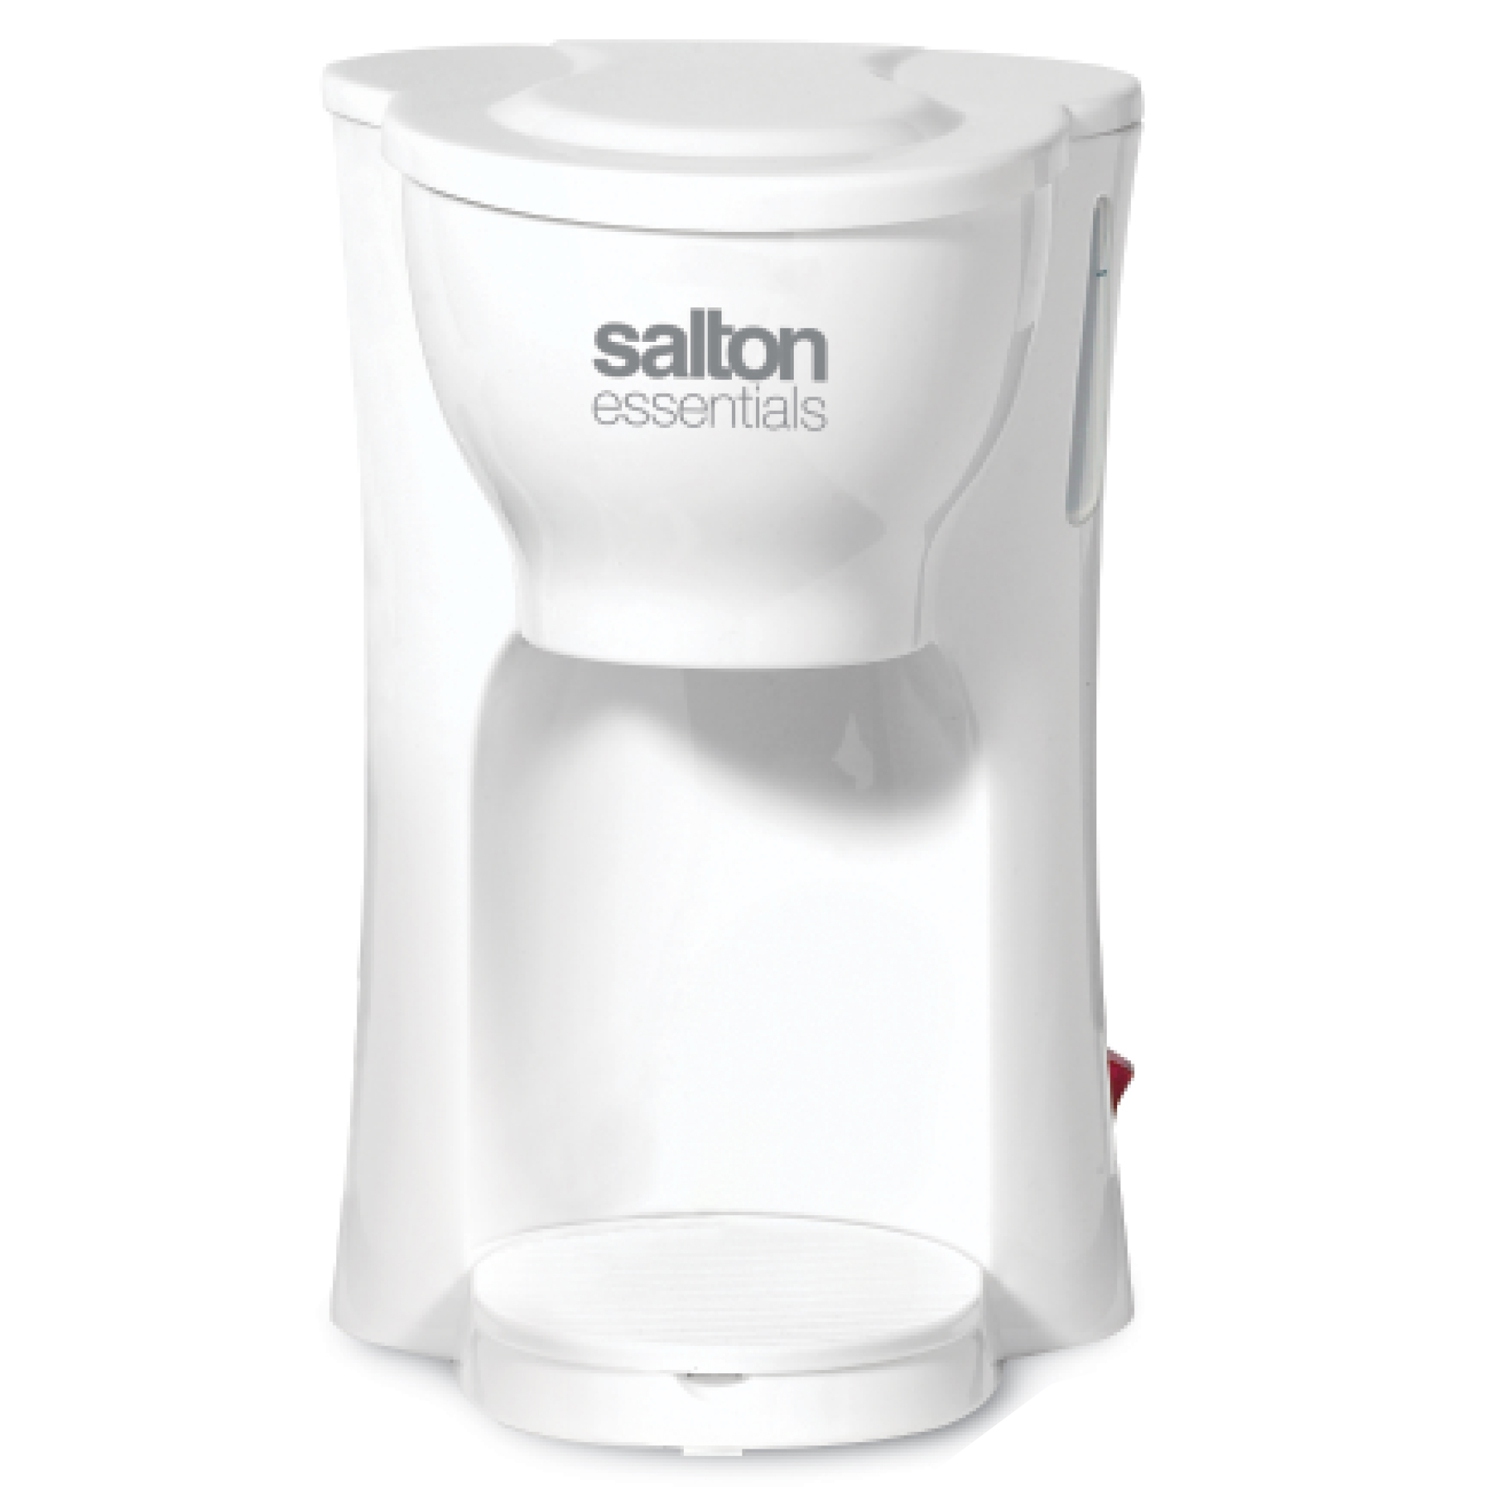 Salton Essentials - Compact 1-Cup Coffee Maker with Permanent Filter, White